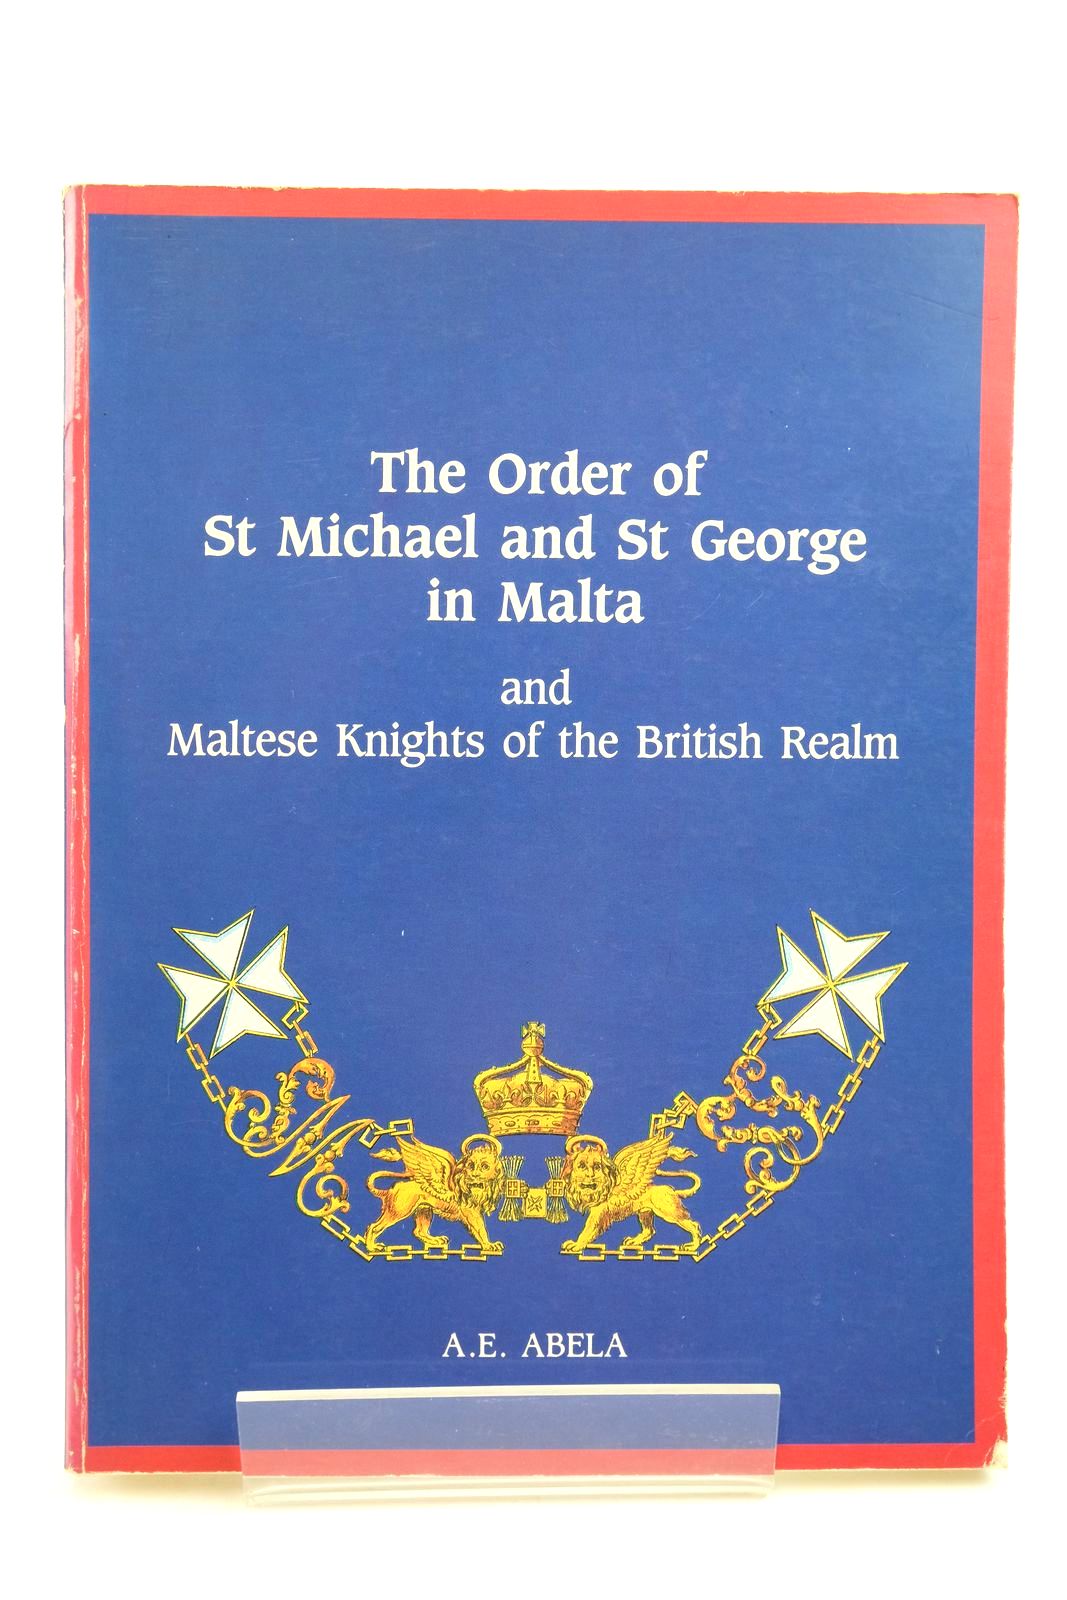 Photo of THE ORDER OF ST. MICHAEL AND ST. GEORGE IN MALTA AND MALTESE KNIGHTS OF THE BRITISH REALM written by Abela, A.E. published by Progress Press Col. Ltd. (STOCK CODE: 2138882)  for sale by Stella & Rose's Books